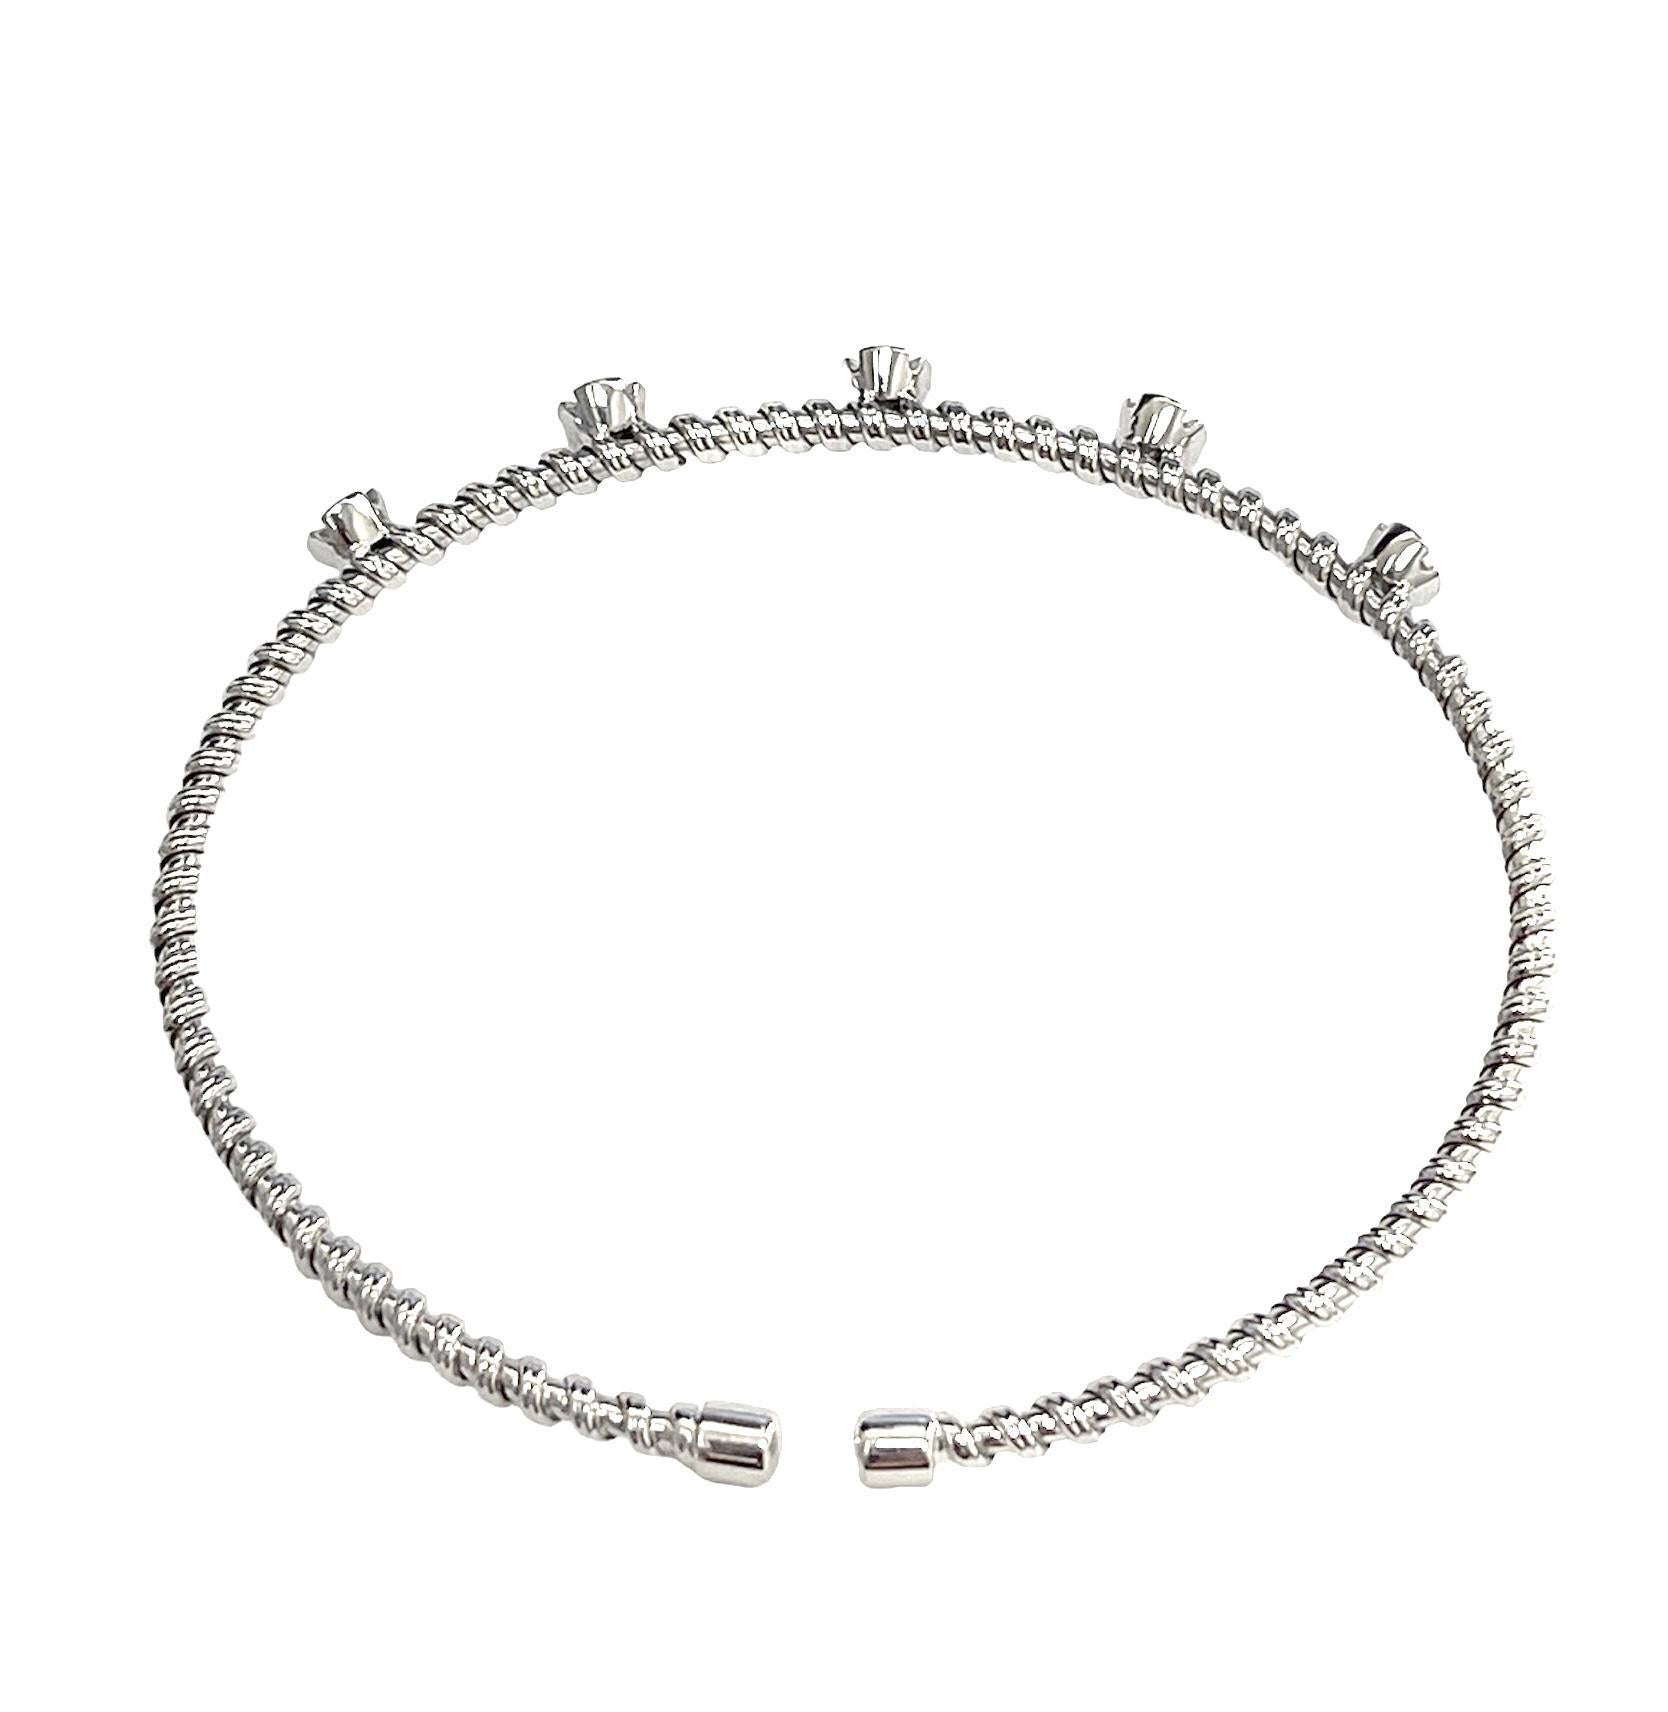 Enhance your style with a touch of brilliance using this exquisite bracelet! Five dazzling diamonds grace the front of the corkscrew cuff, captivating attention to your wrist. The greatest advantage? It's available in various plating, allowing you